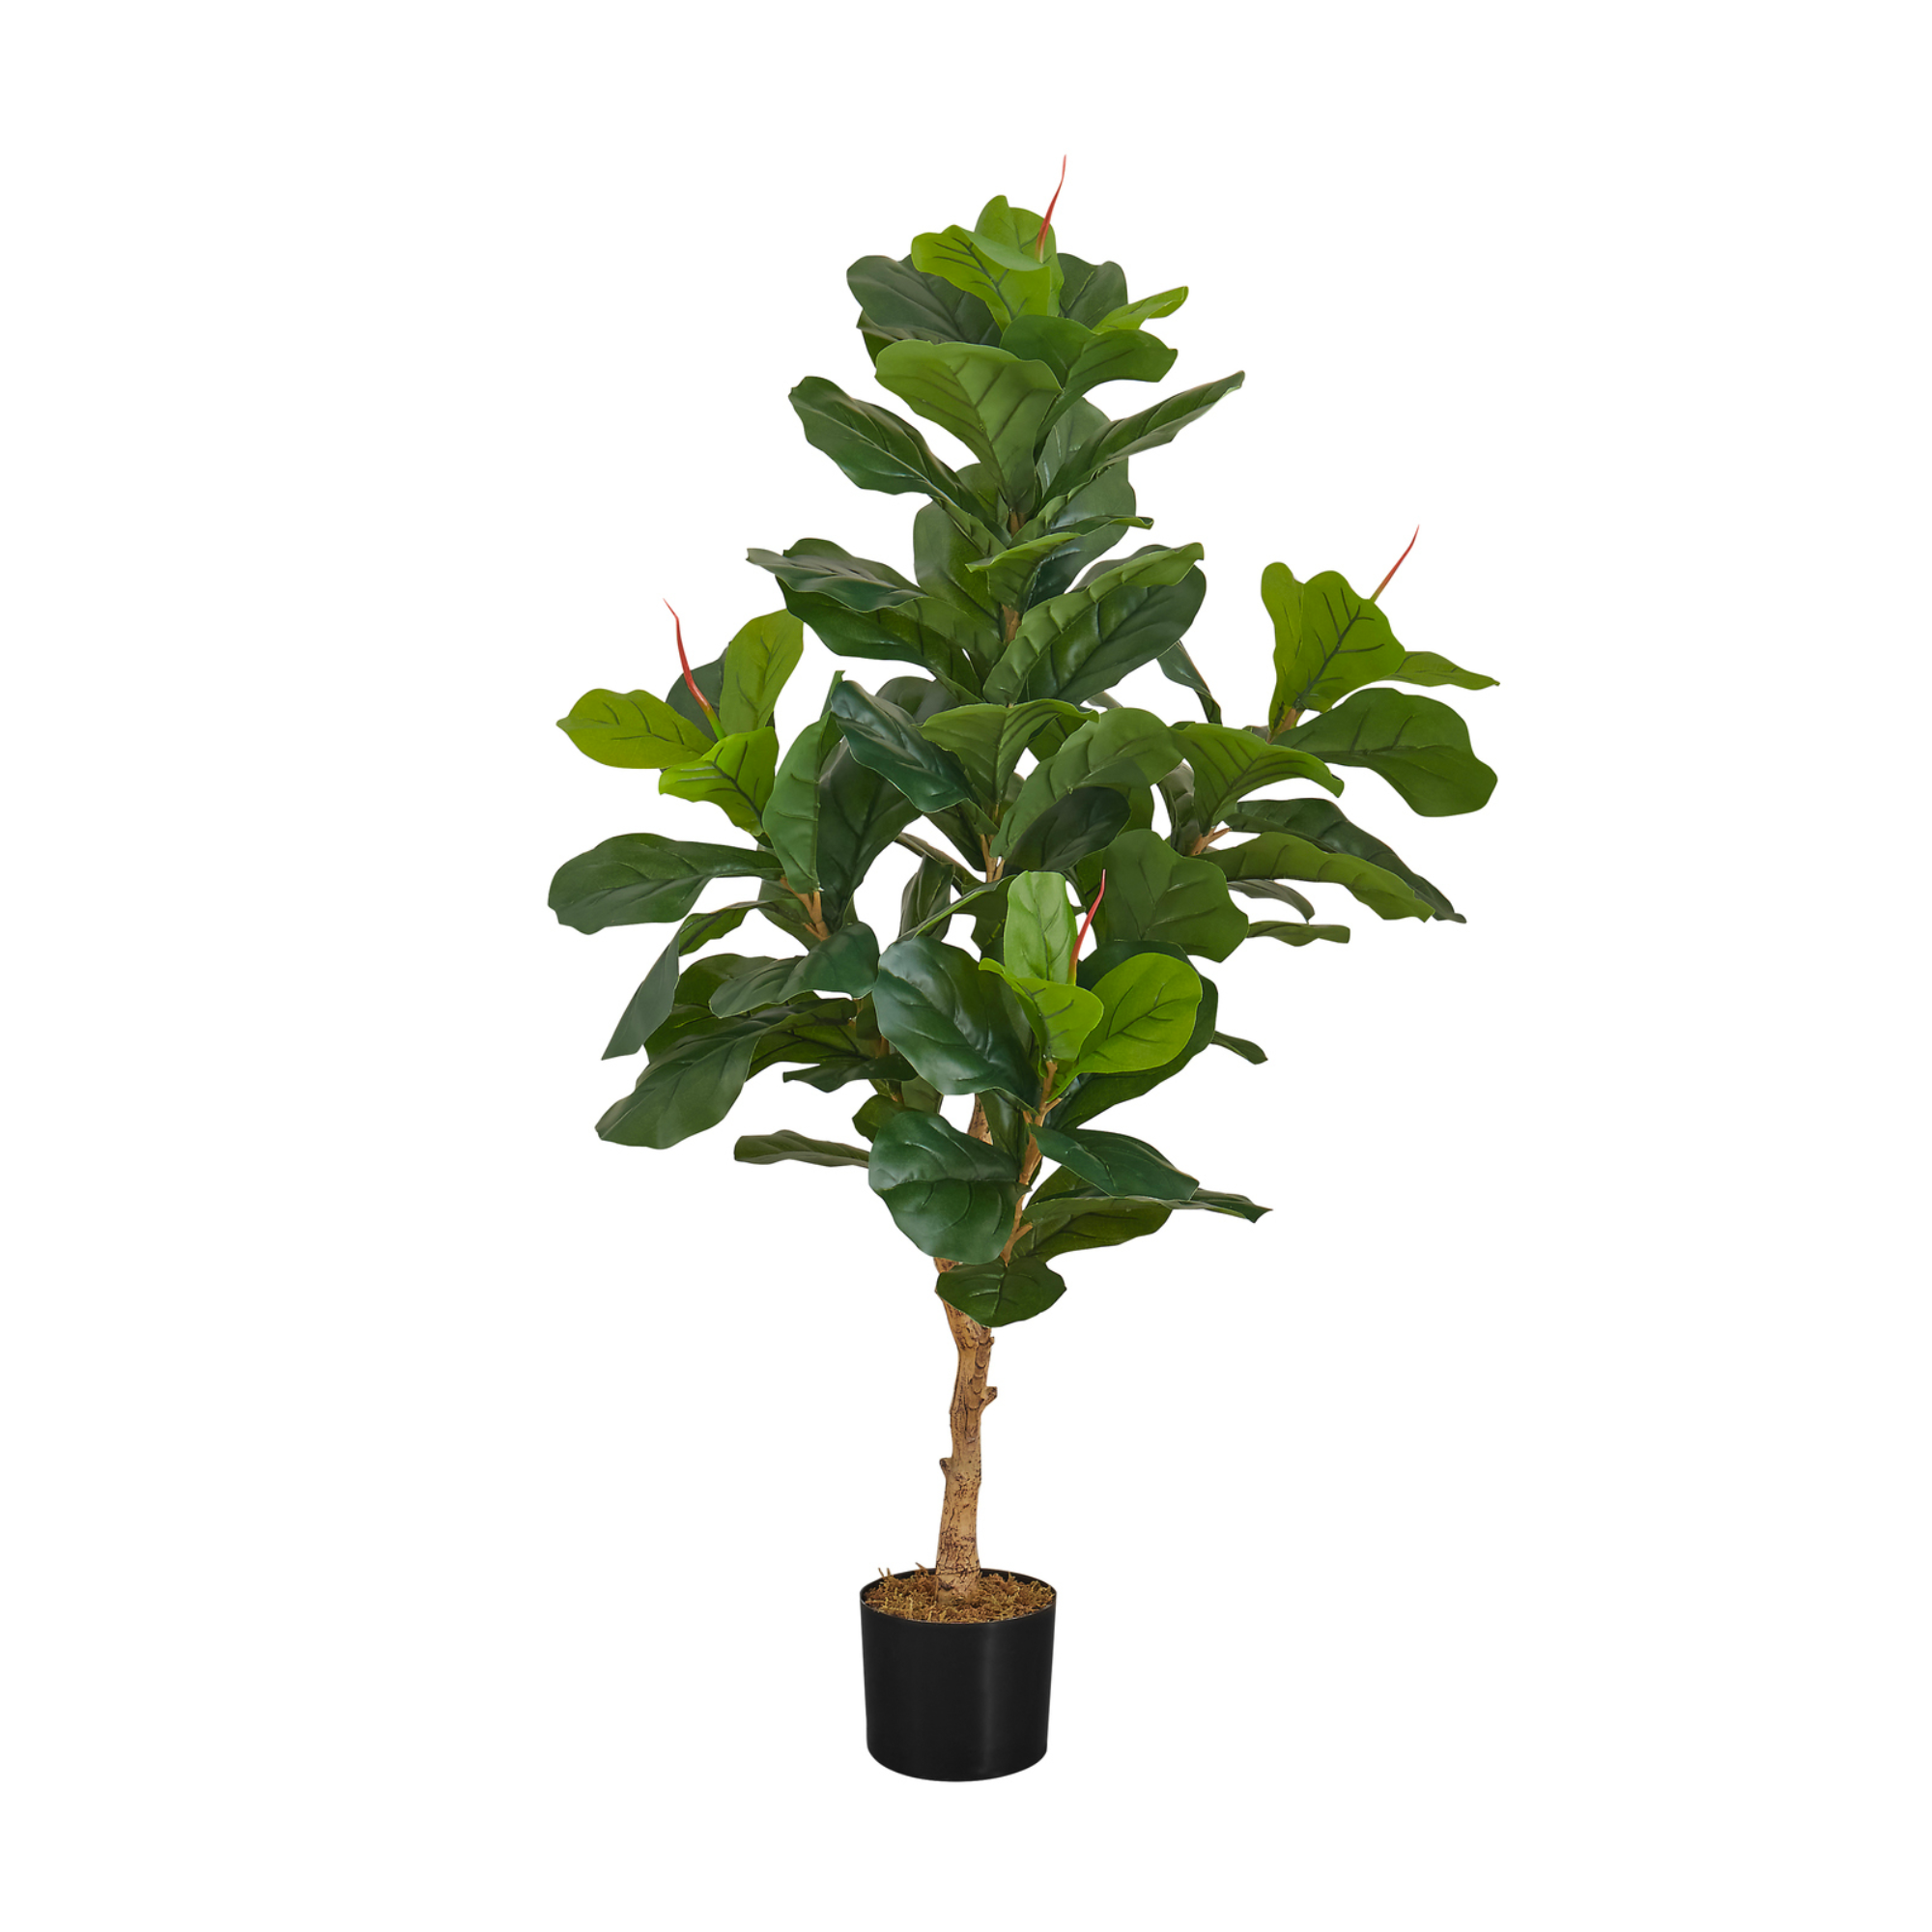 ARTIFICIAL PLANT - 47"H / INDOOR FIDDLE TREE IN A 5" POT